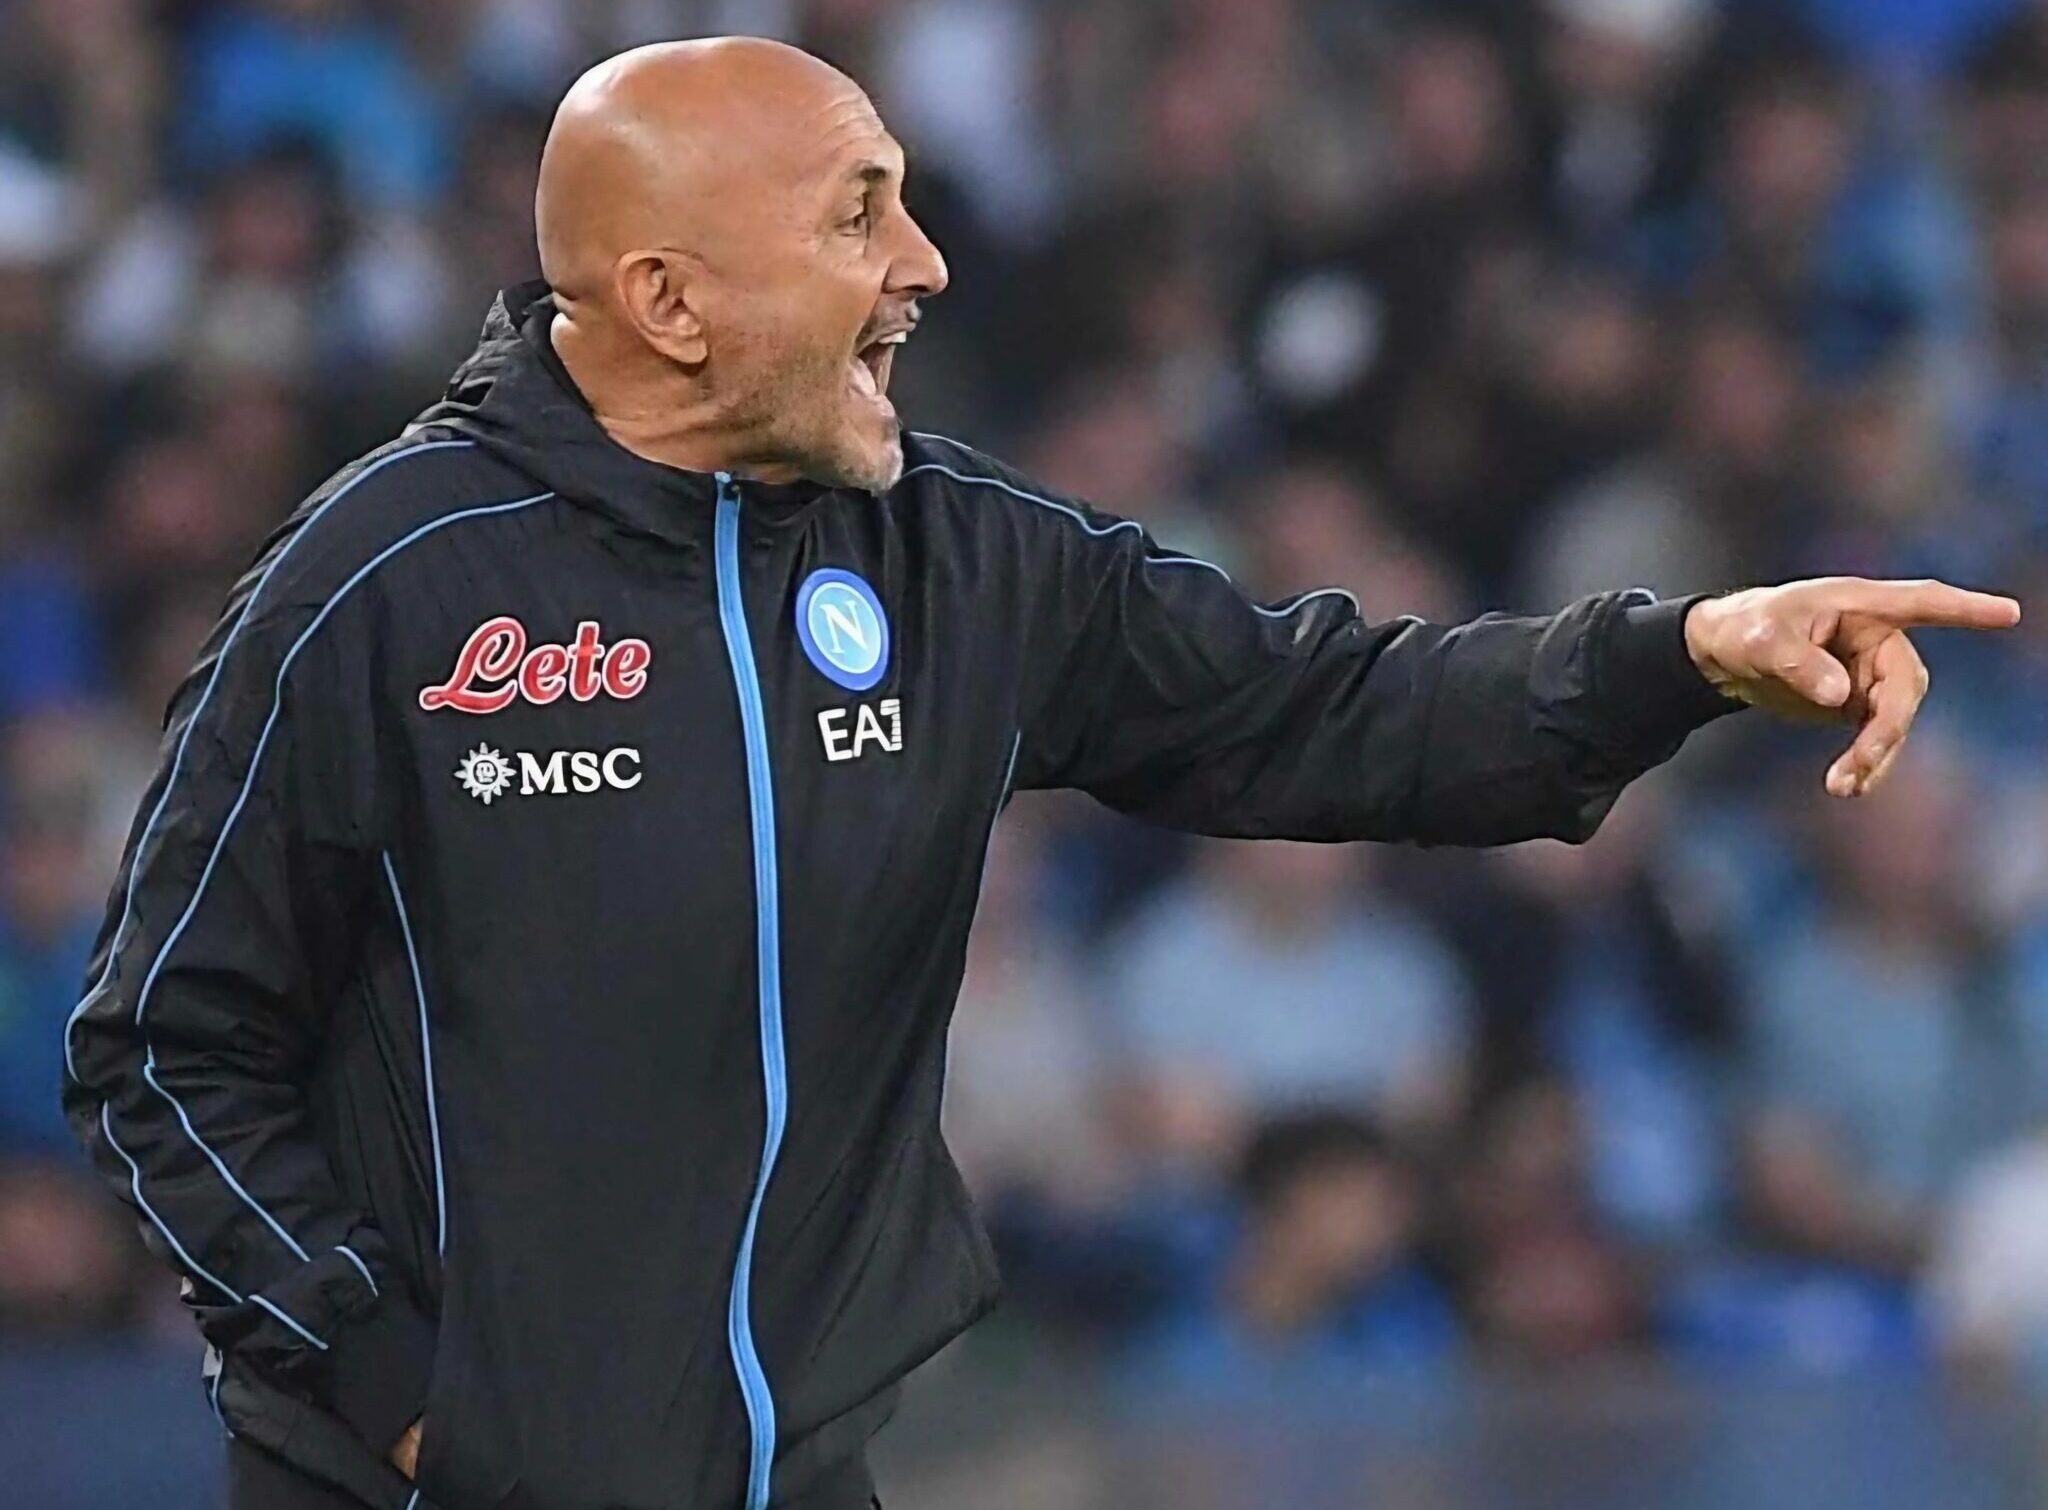 Luciano Spalletti, coach of SSC Napoli, on the sidelines